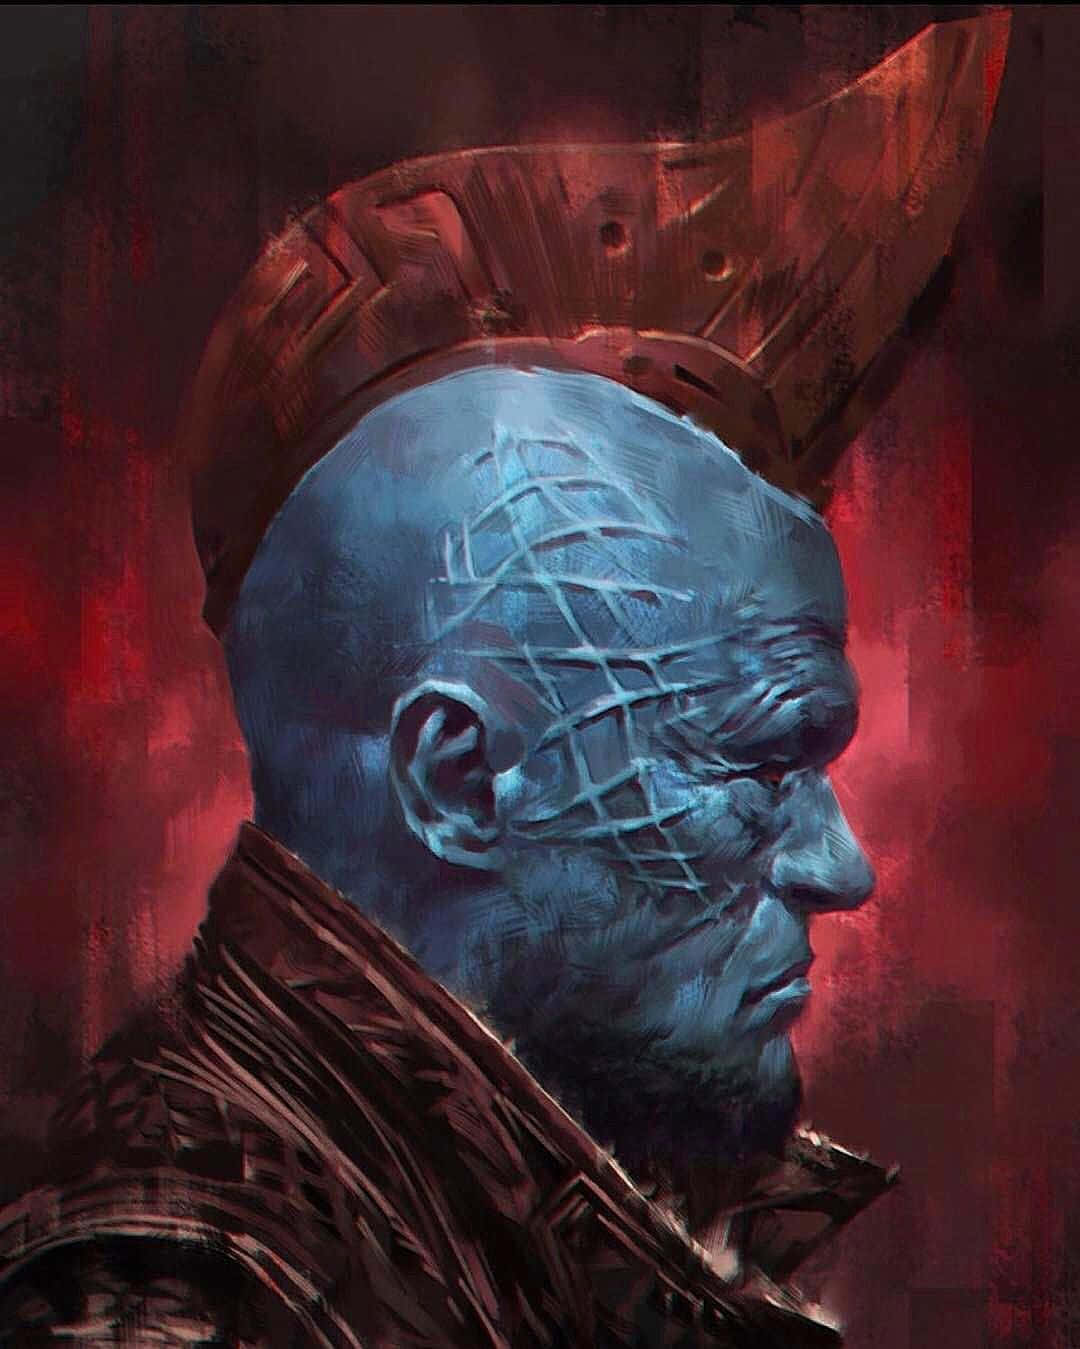 Explore the cosmos with Yondu! Wallpaper